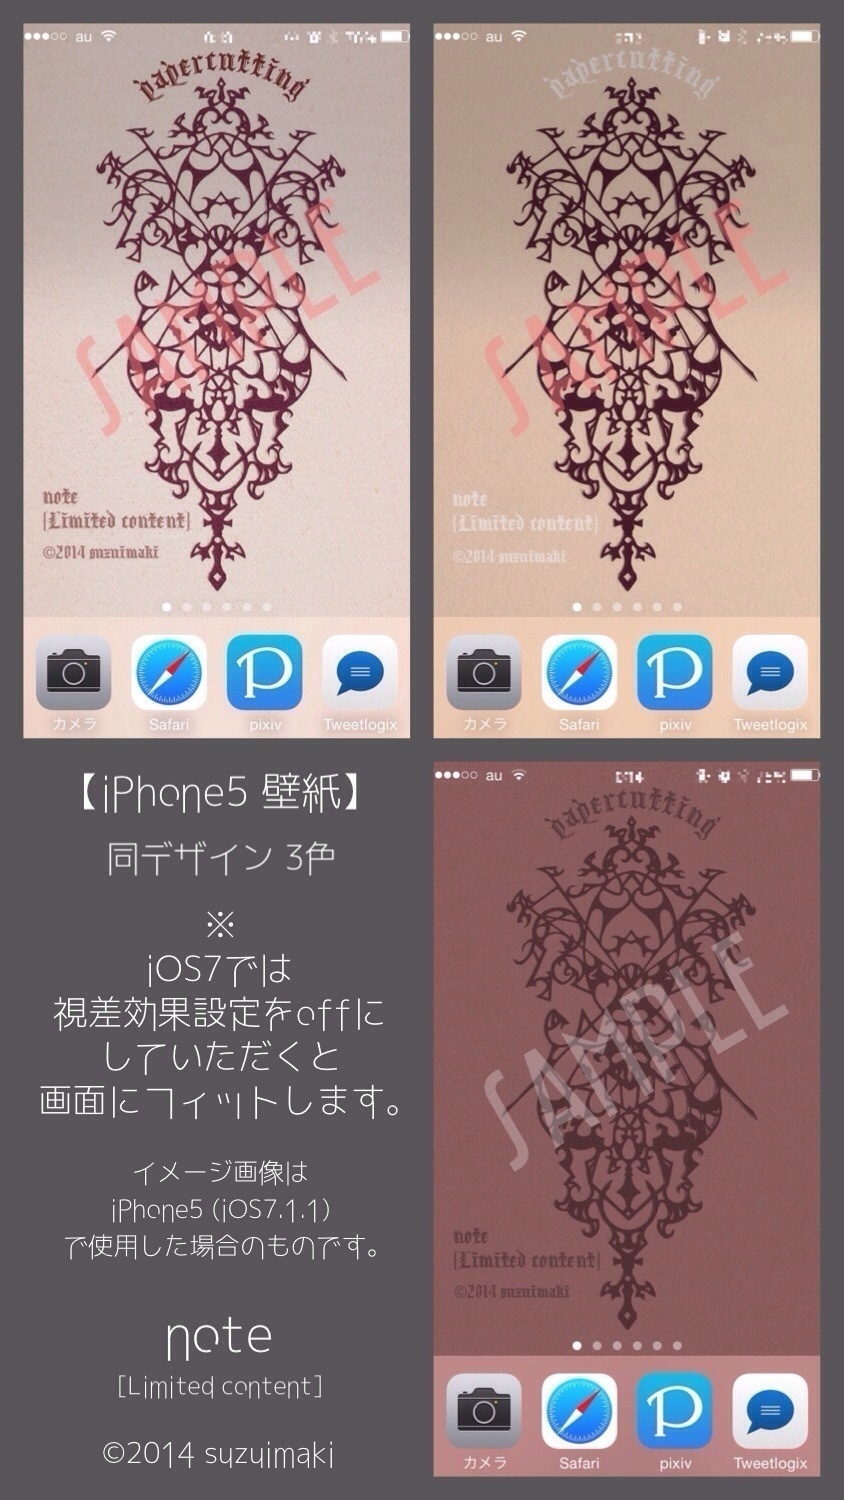 Iphone5 壁紙 Msf Note Wp001 鈴井真綺 Note